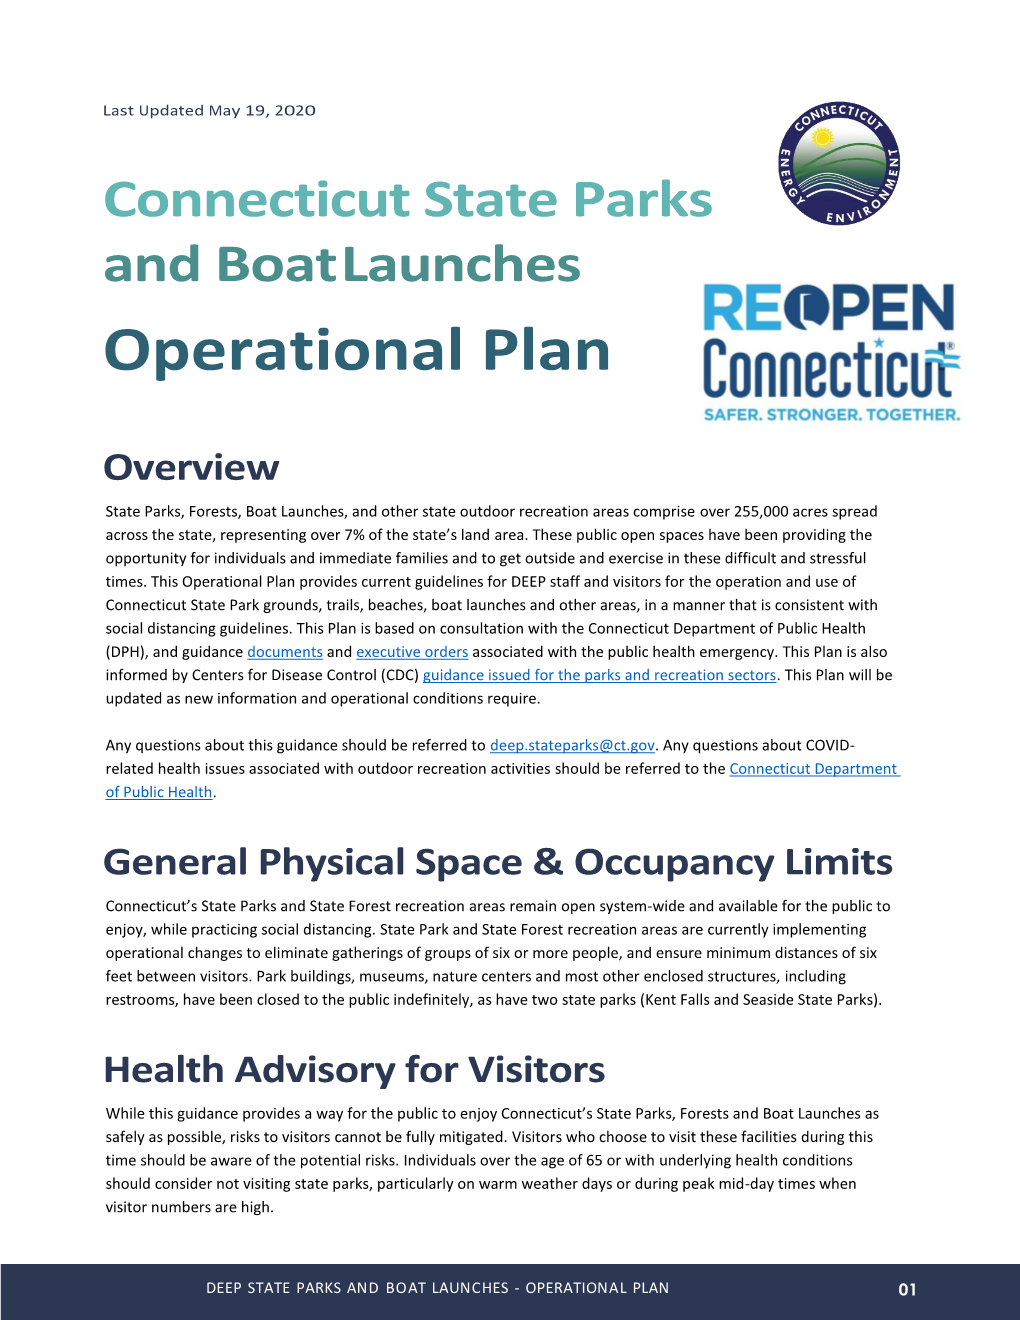 Connecticut State Parks and Boat Launches Operational Plan